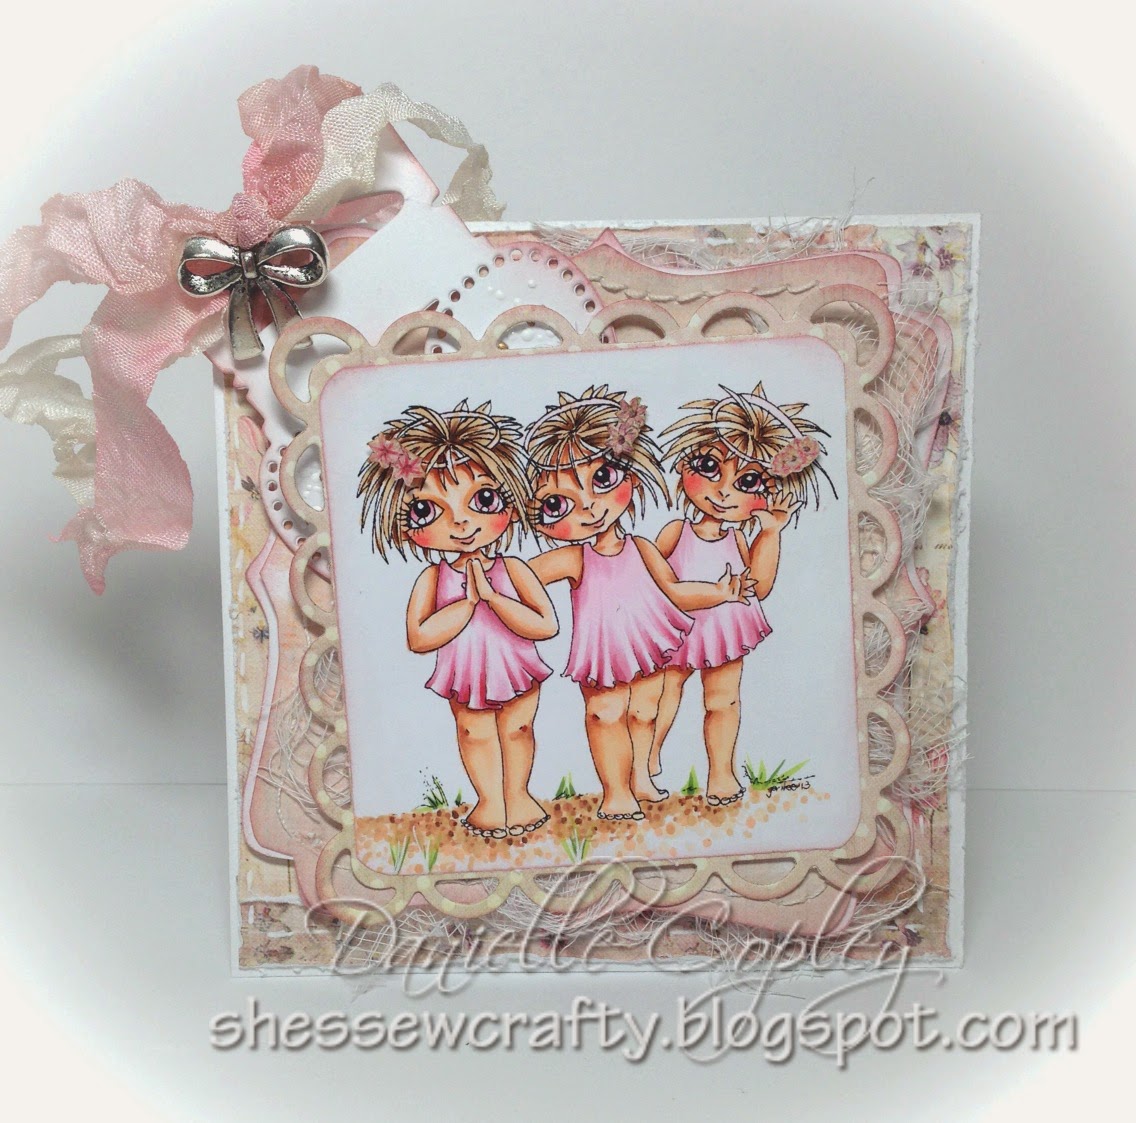 Digi Stamps 4 Joy Angels 3 R We pink card with Prima Princess paper and Magnolia Tag Die from Scrapbook Maven